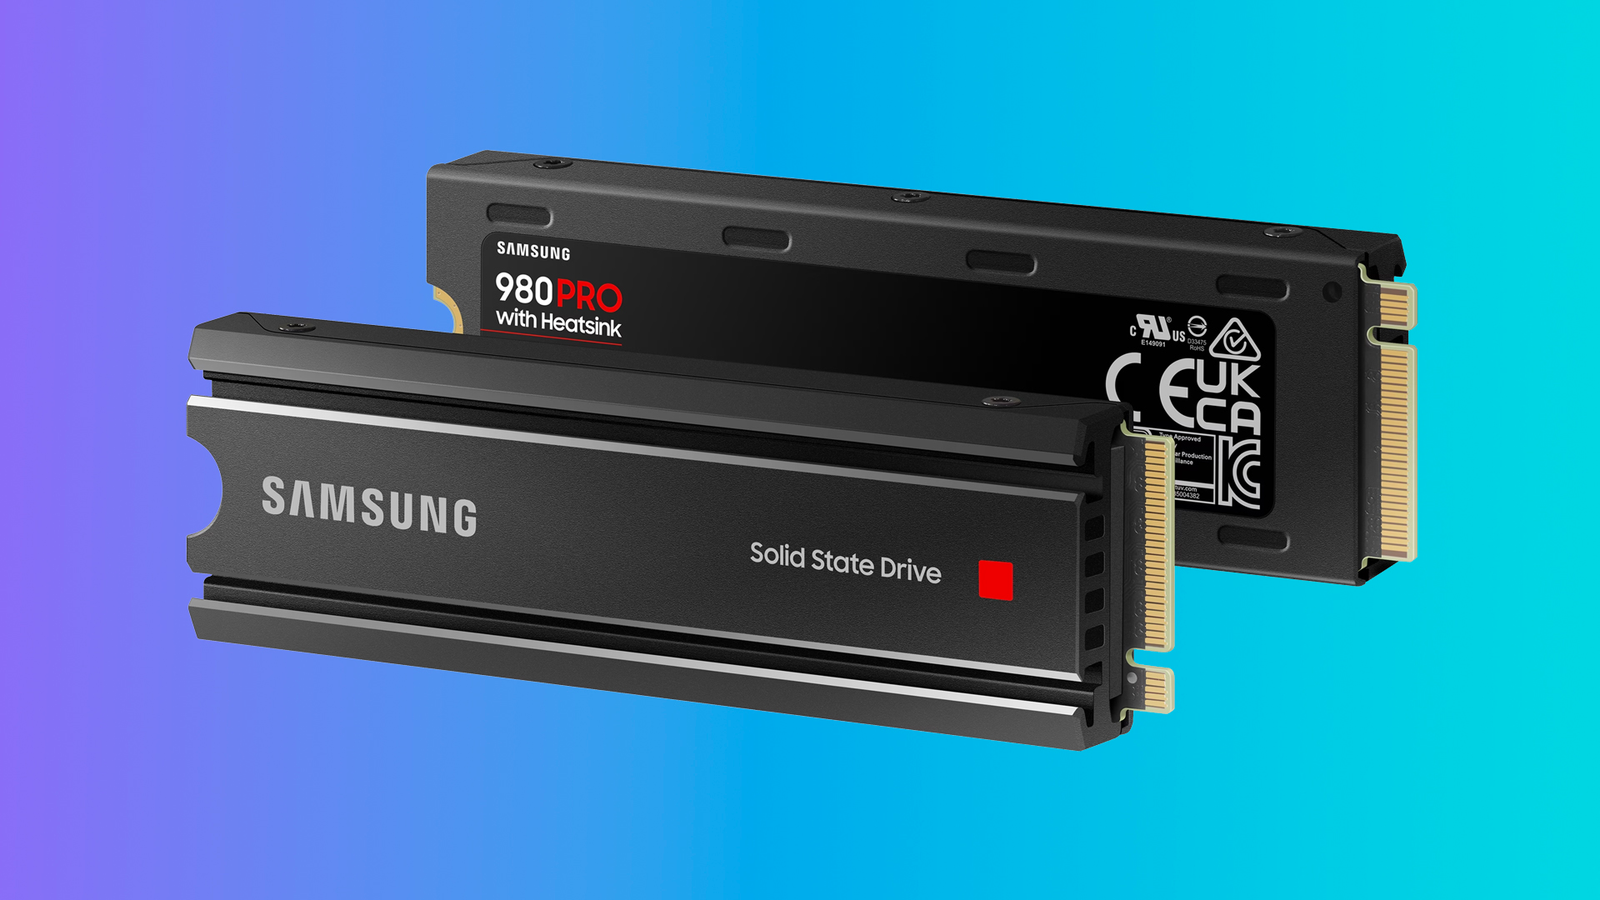 Take home Samsung's 980 Pro 1TB Heatsink SSD for £73 thanks to an  code